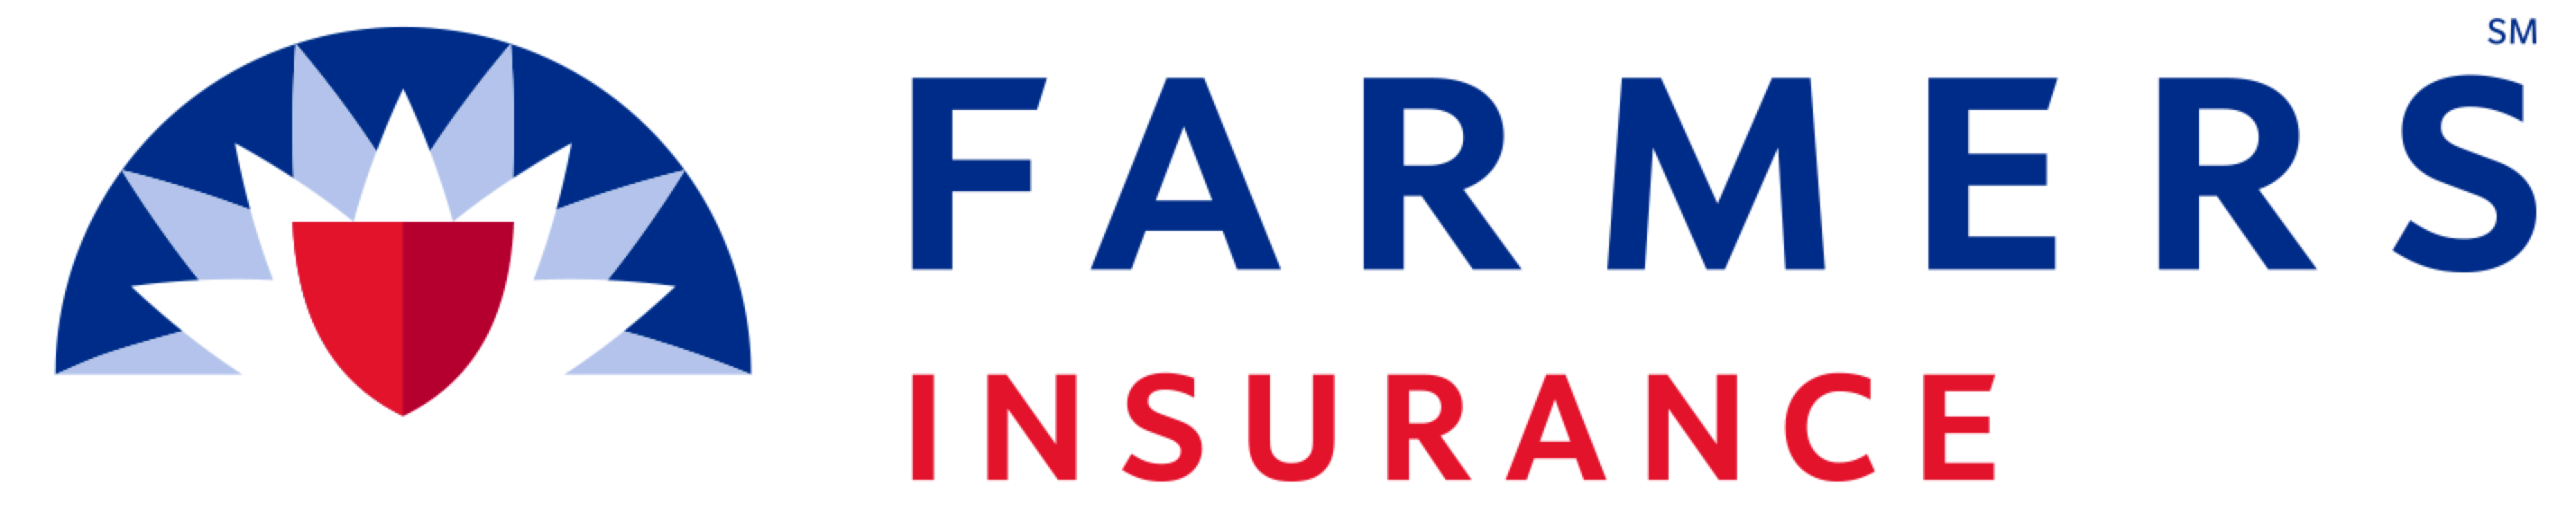 Logo: Red shield on left, text on right that says 'Farmers Insurance'